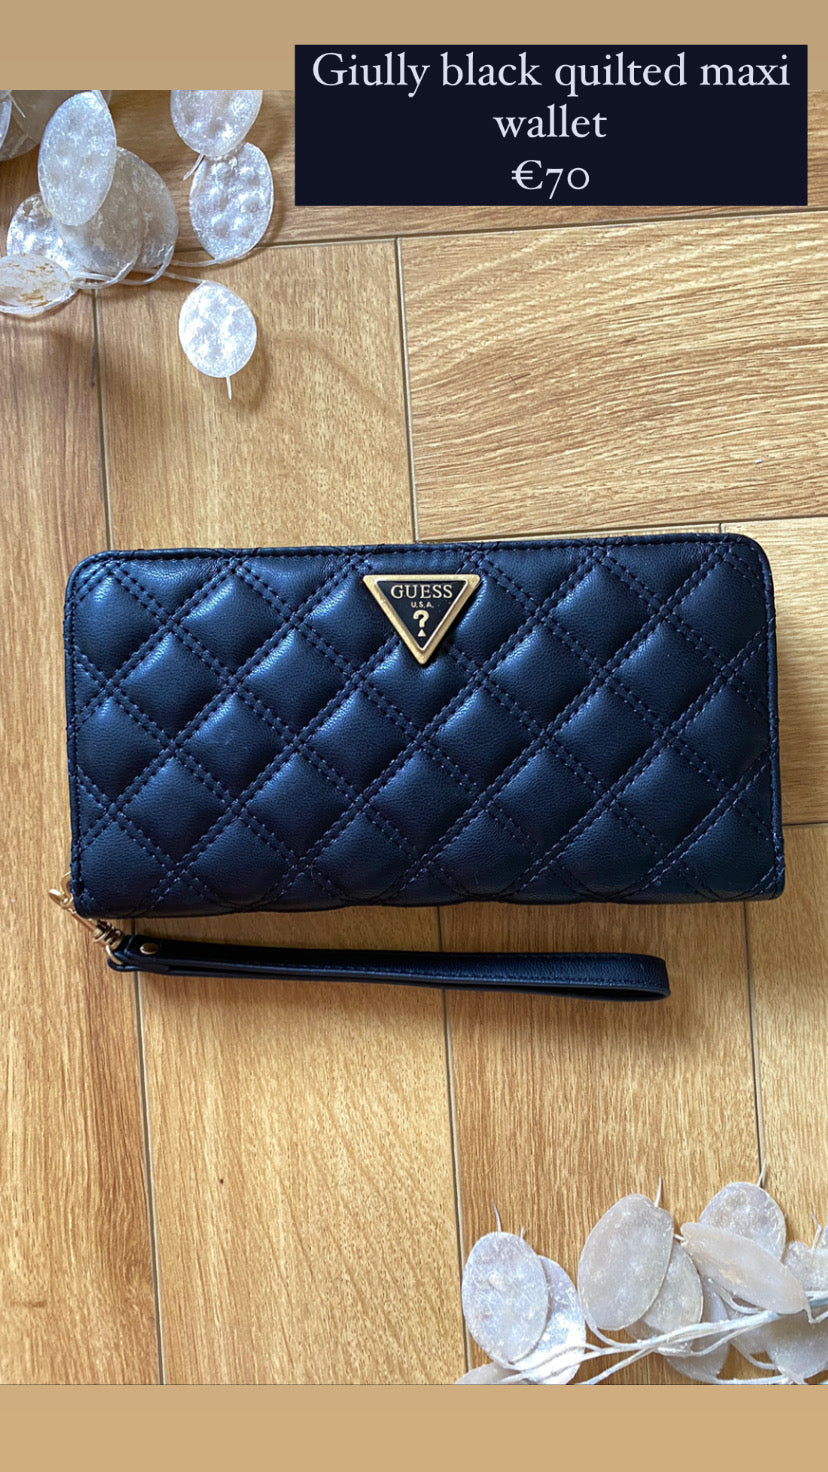 Qa874846 Giully black  quilted maxi wallet